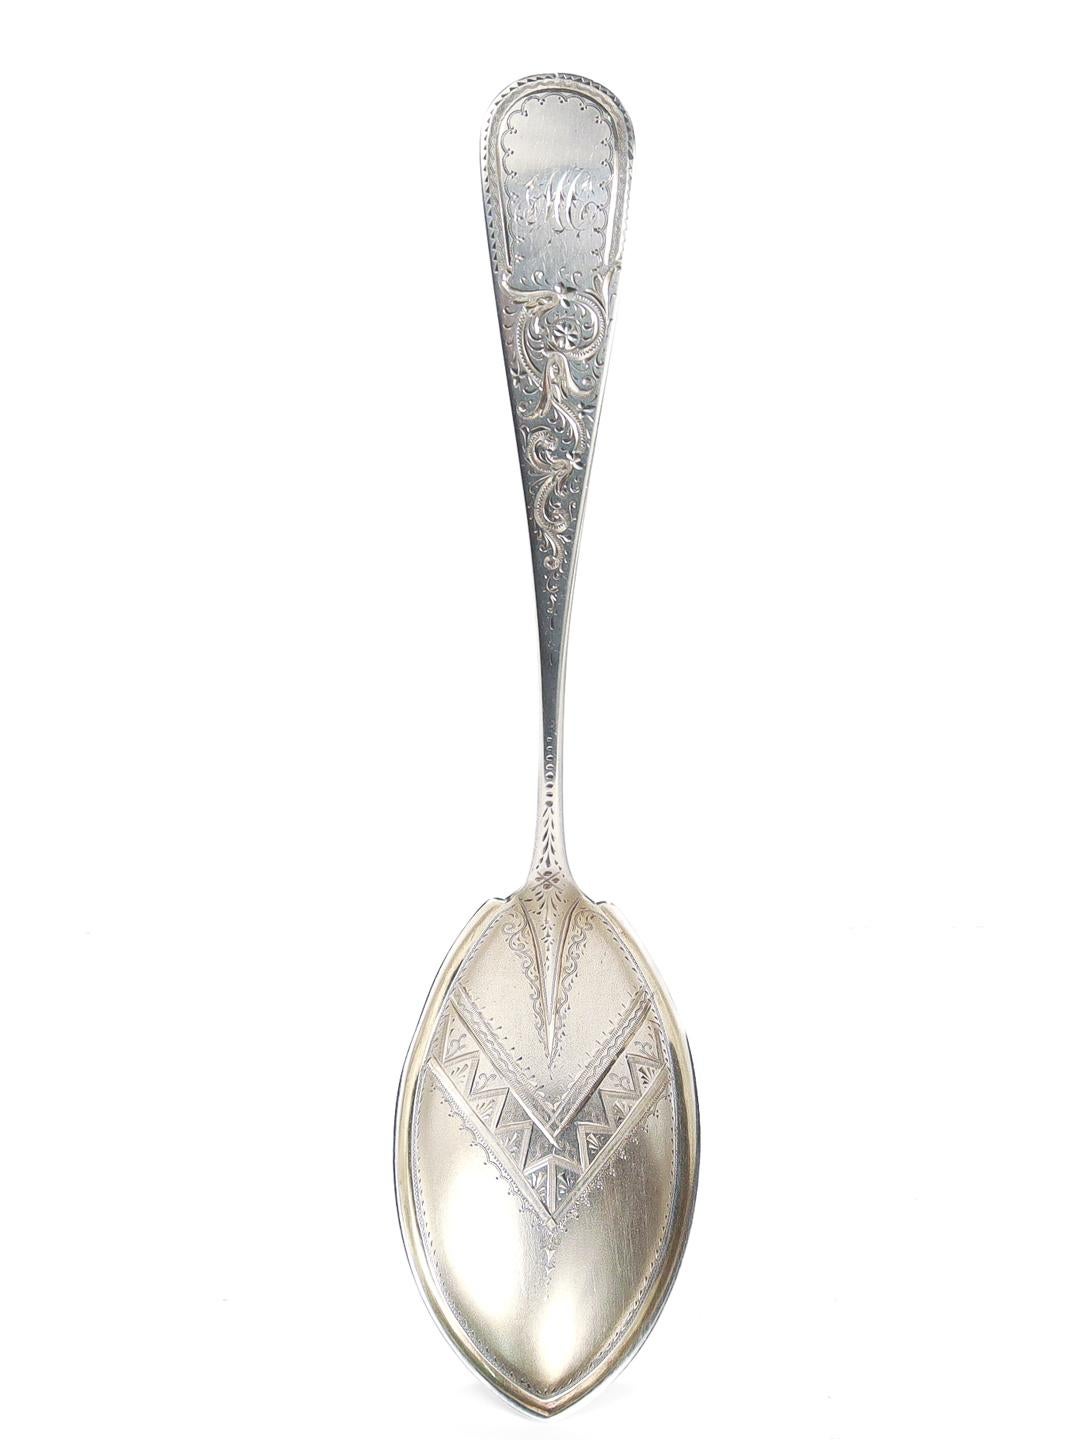 Aesthetic Movement American Aesthetic Period R. & W. Wilson Brite Cut Sterling Silver Serving Spoon For Sale